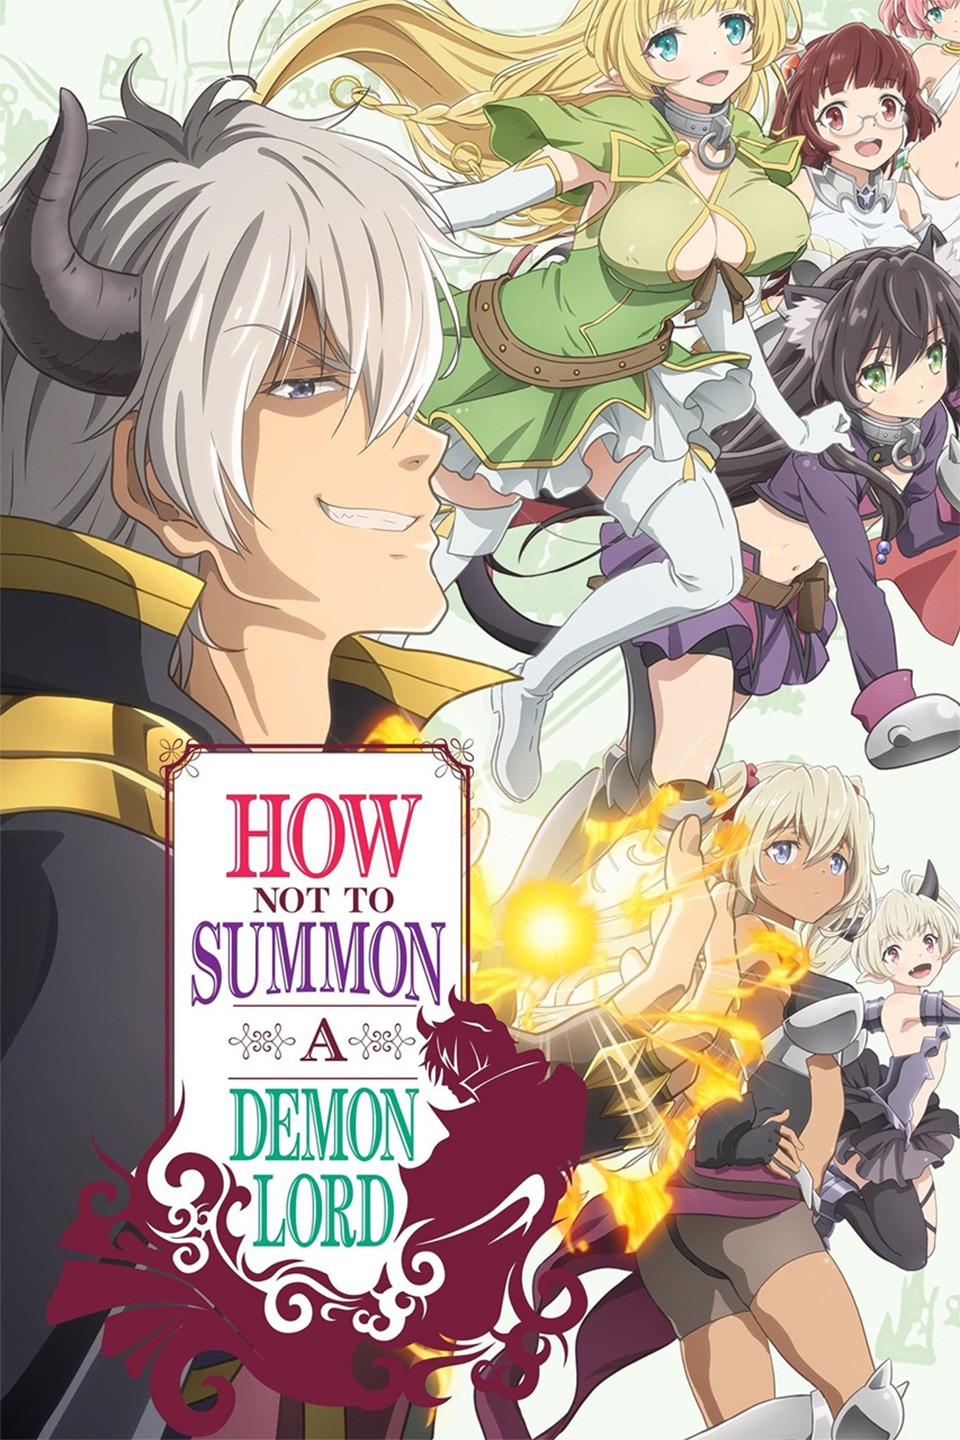 How Not to Summon a Demon Lord Ω - VGMdb